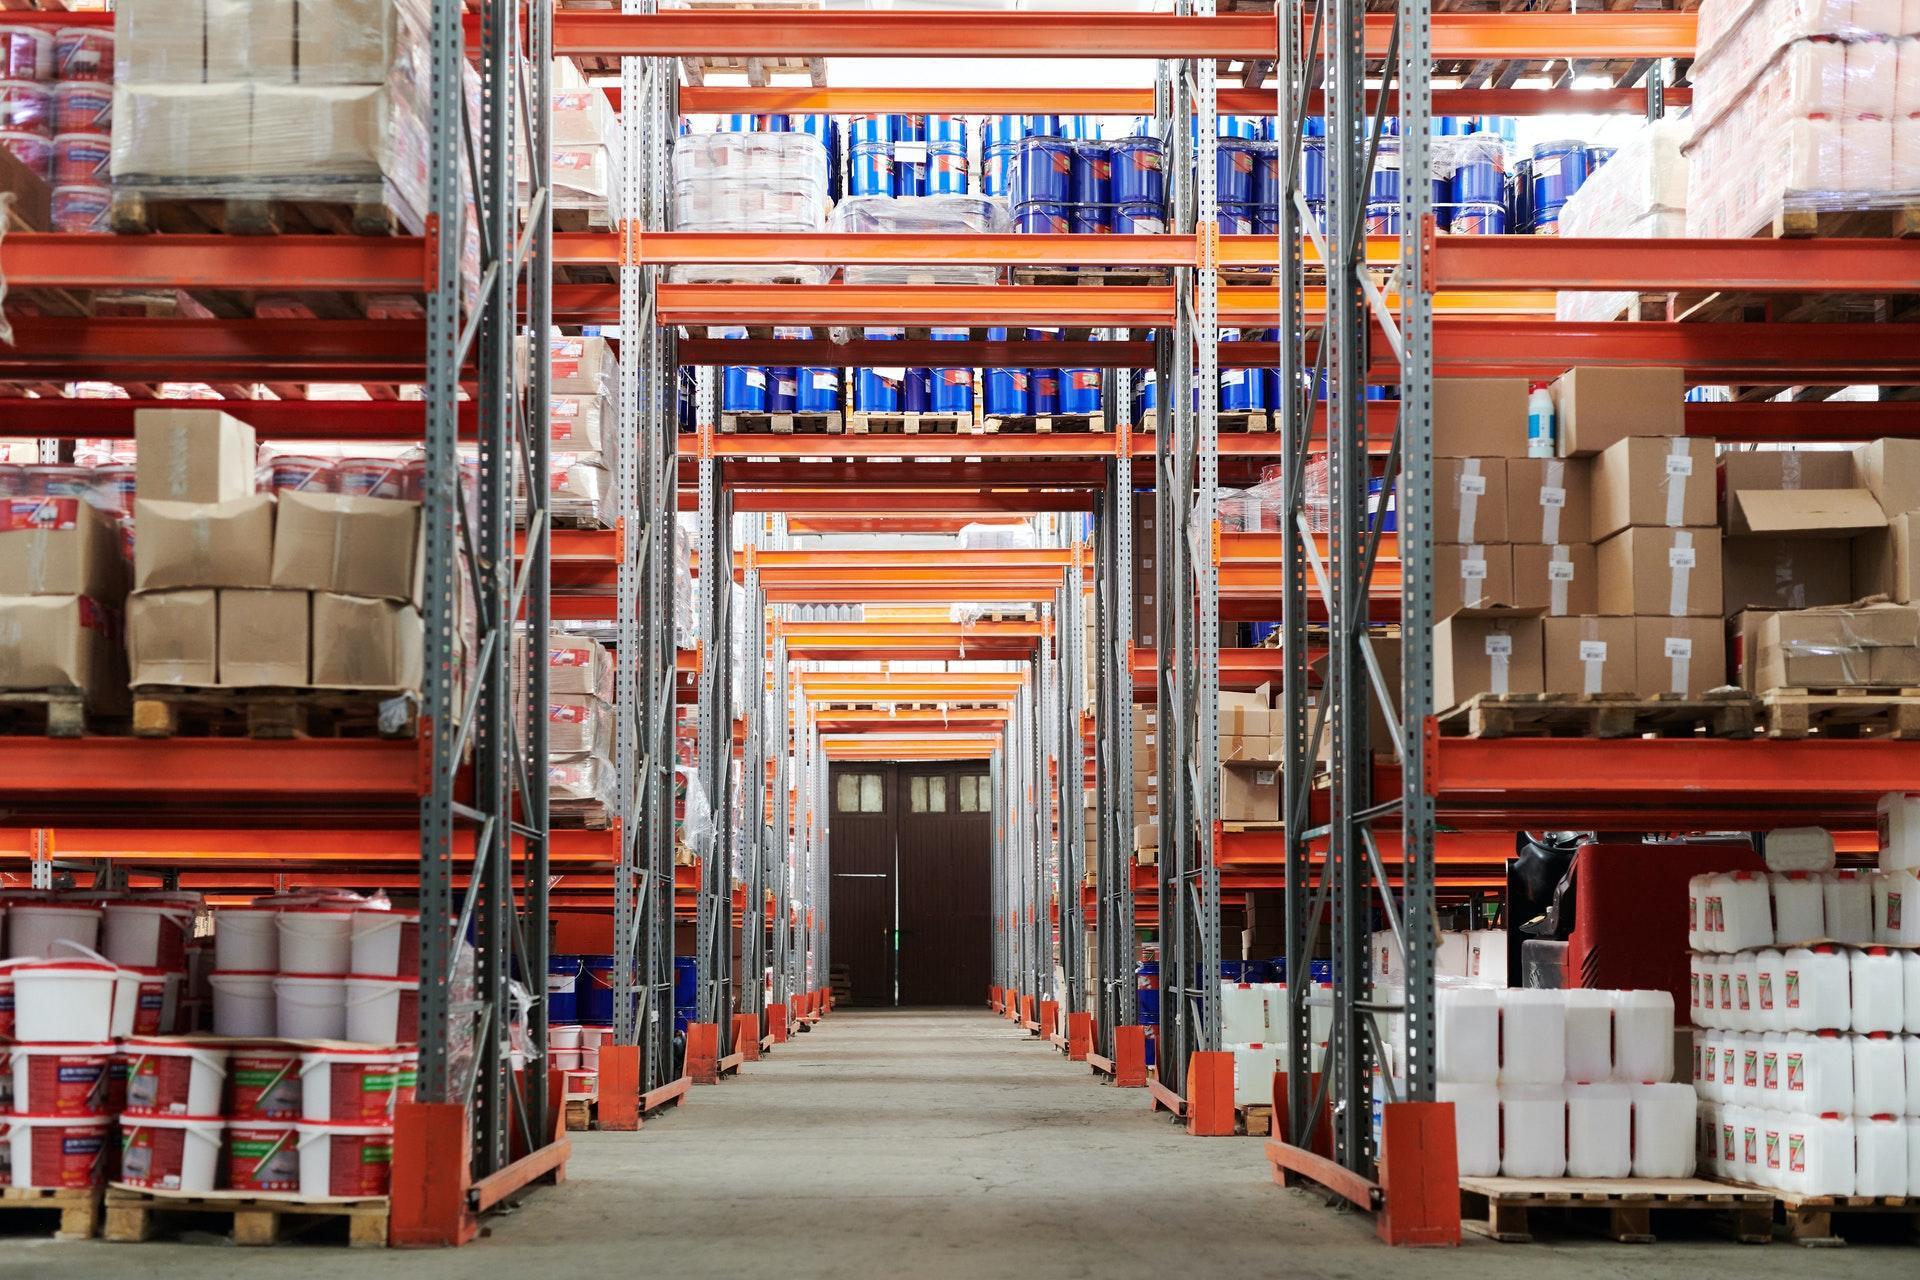 A big warehouse with shelves stacked with boxes of products.